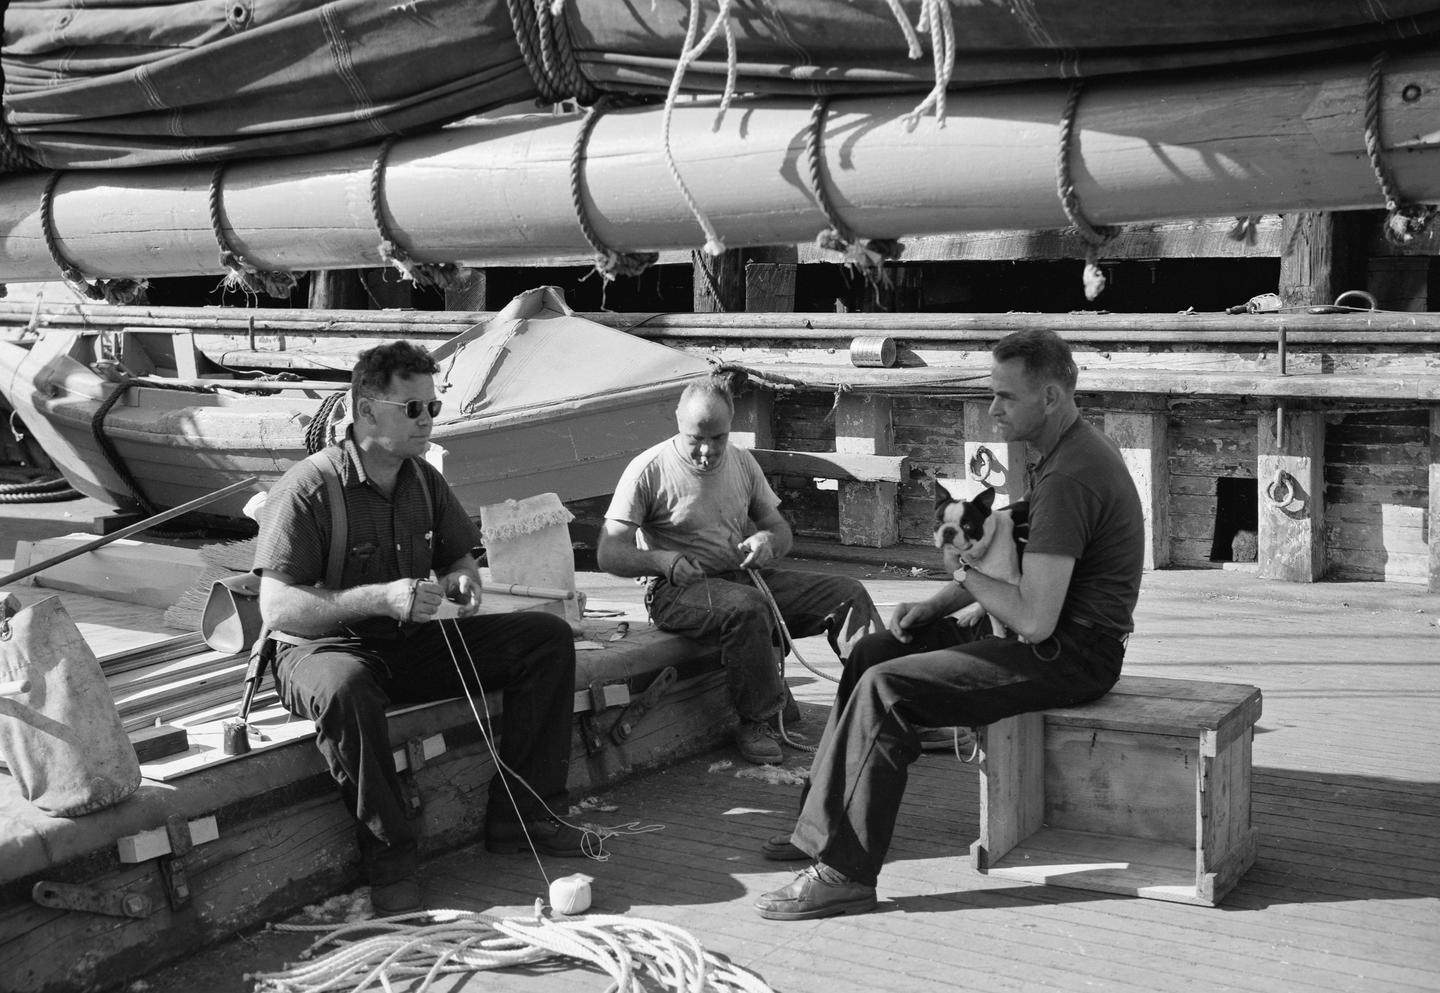 Museum founders working aboard CA Thayer Karl Kortum and two other museum sailors sitting on CA Thayer's hatch working 